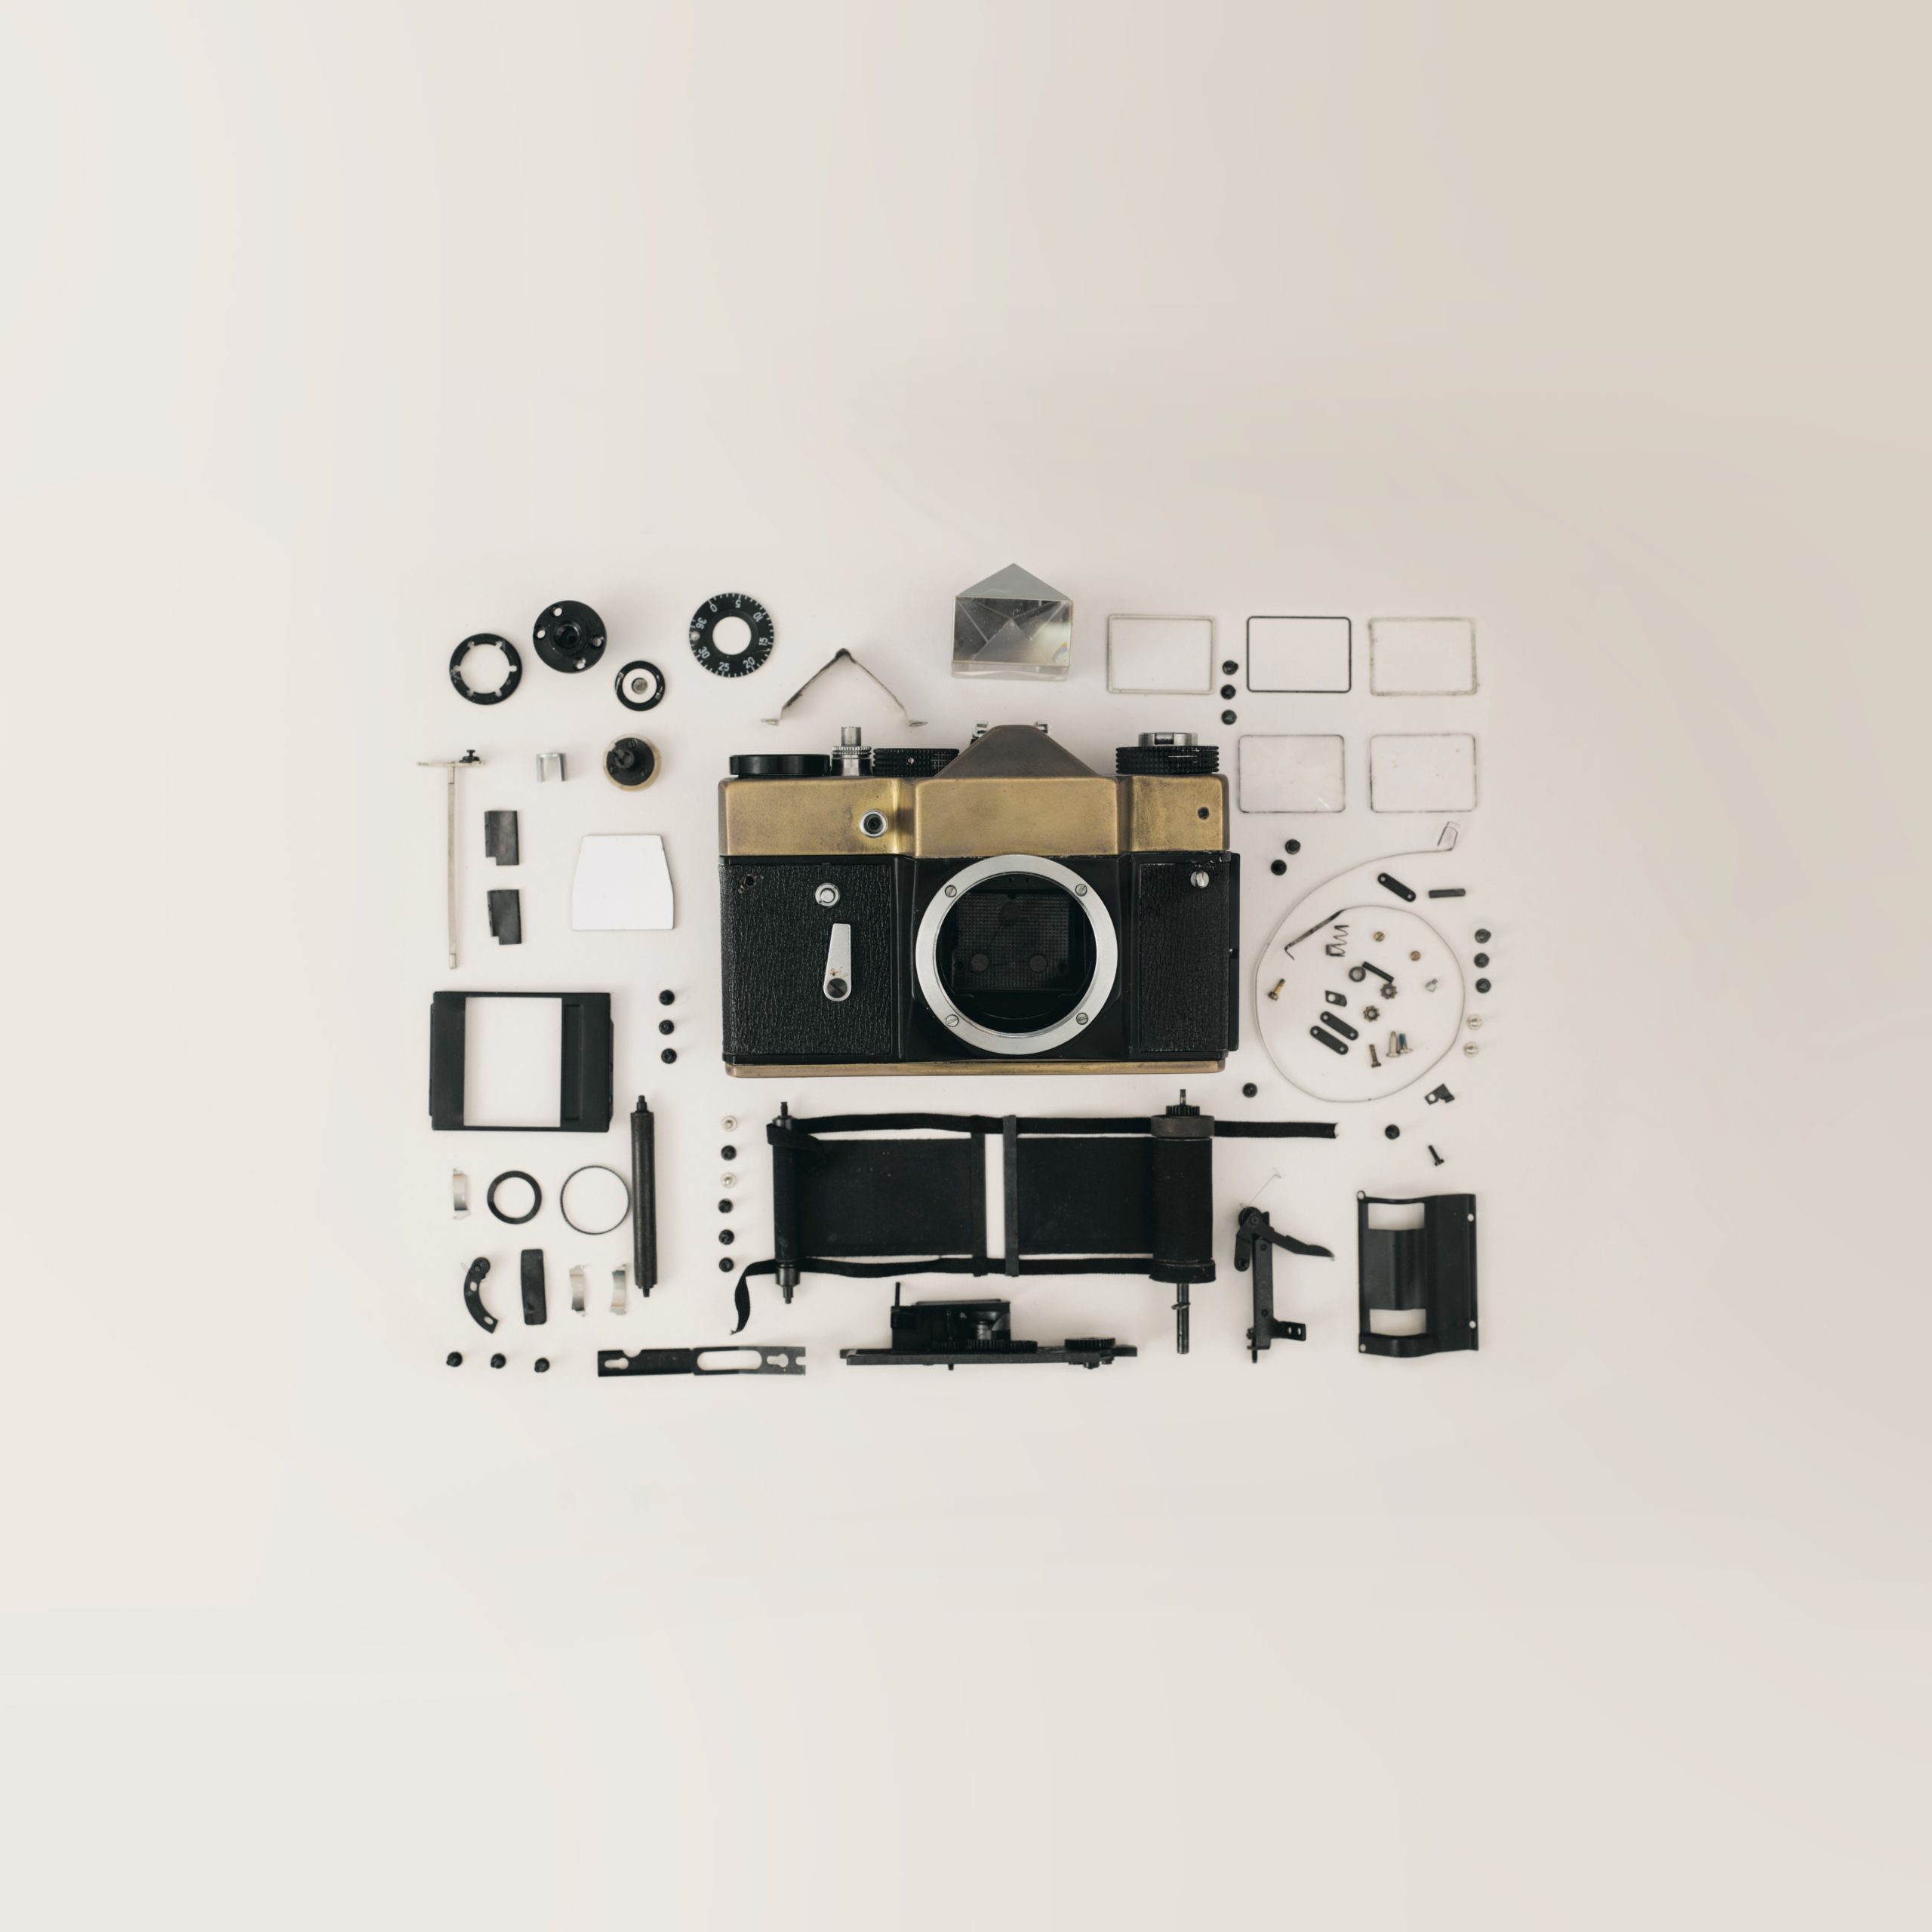 Photo of parts of a 35 mm camera laid out on a table